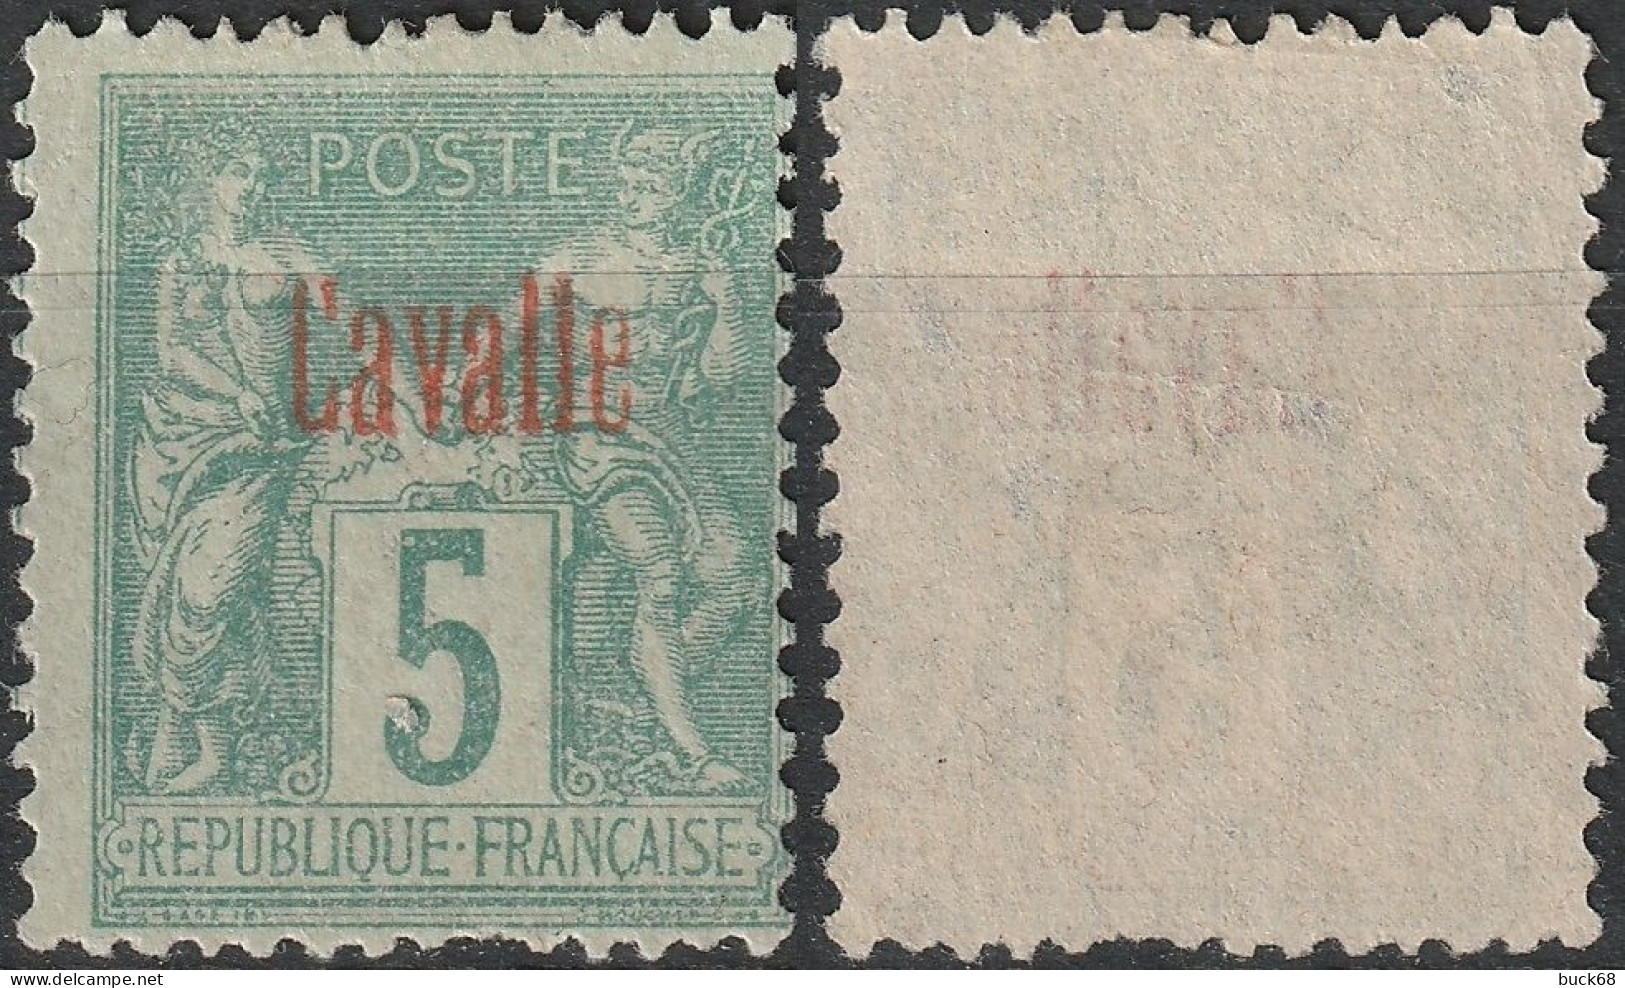 CAVALLE Poste 1a (*) MHNG Type Groupe Surcharge Rouge 1893 (CV 35 €) [ColCla] - Ongebruikt